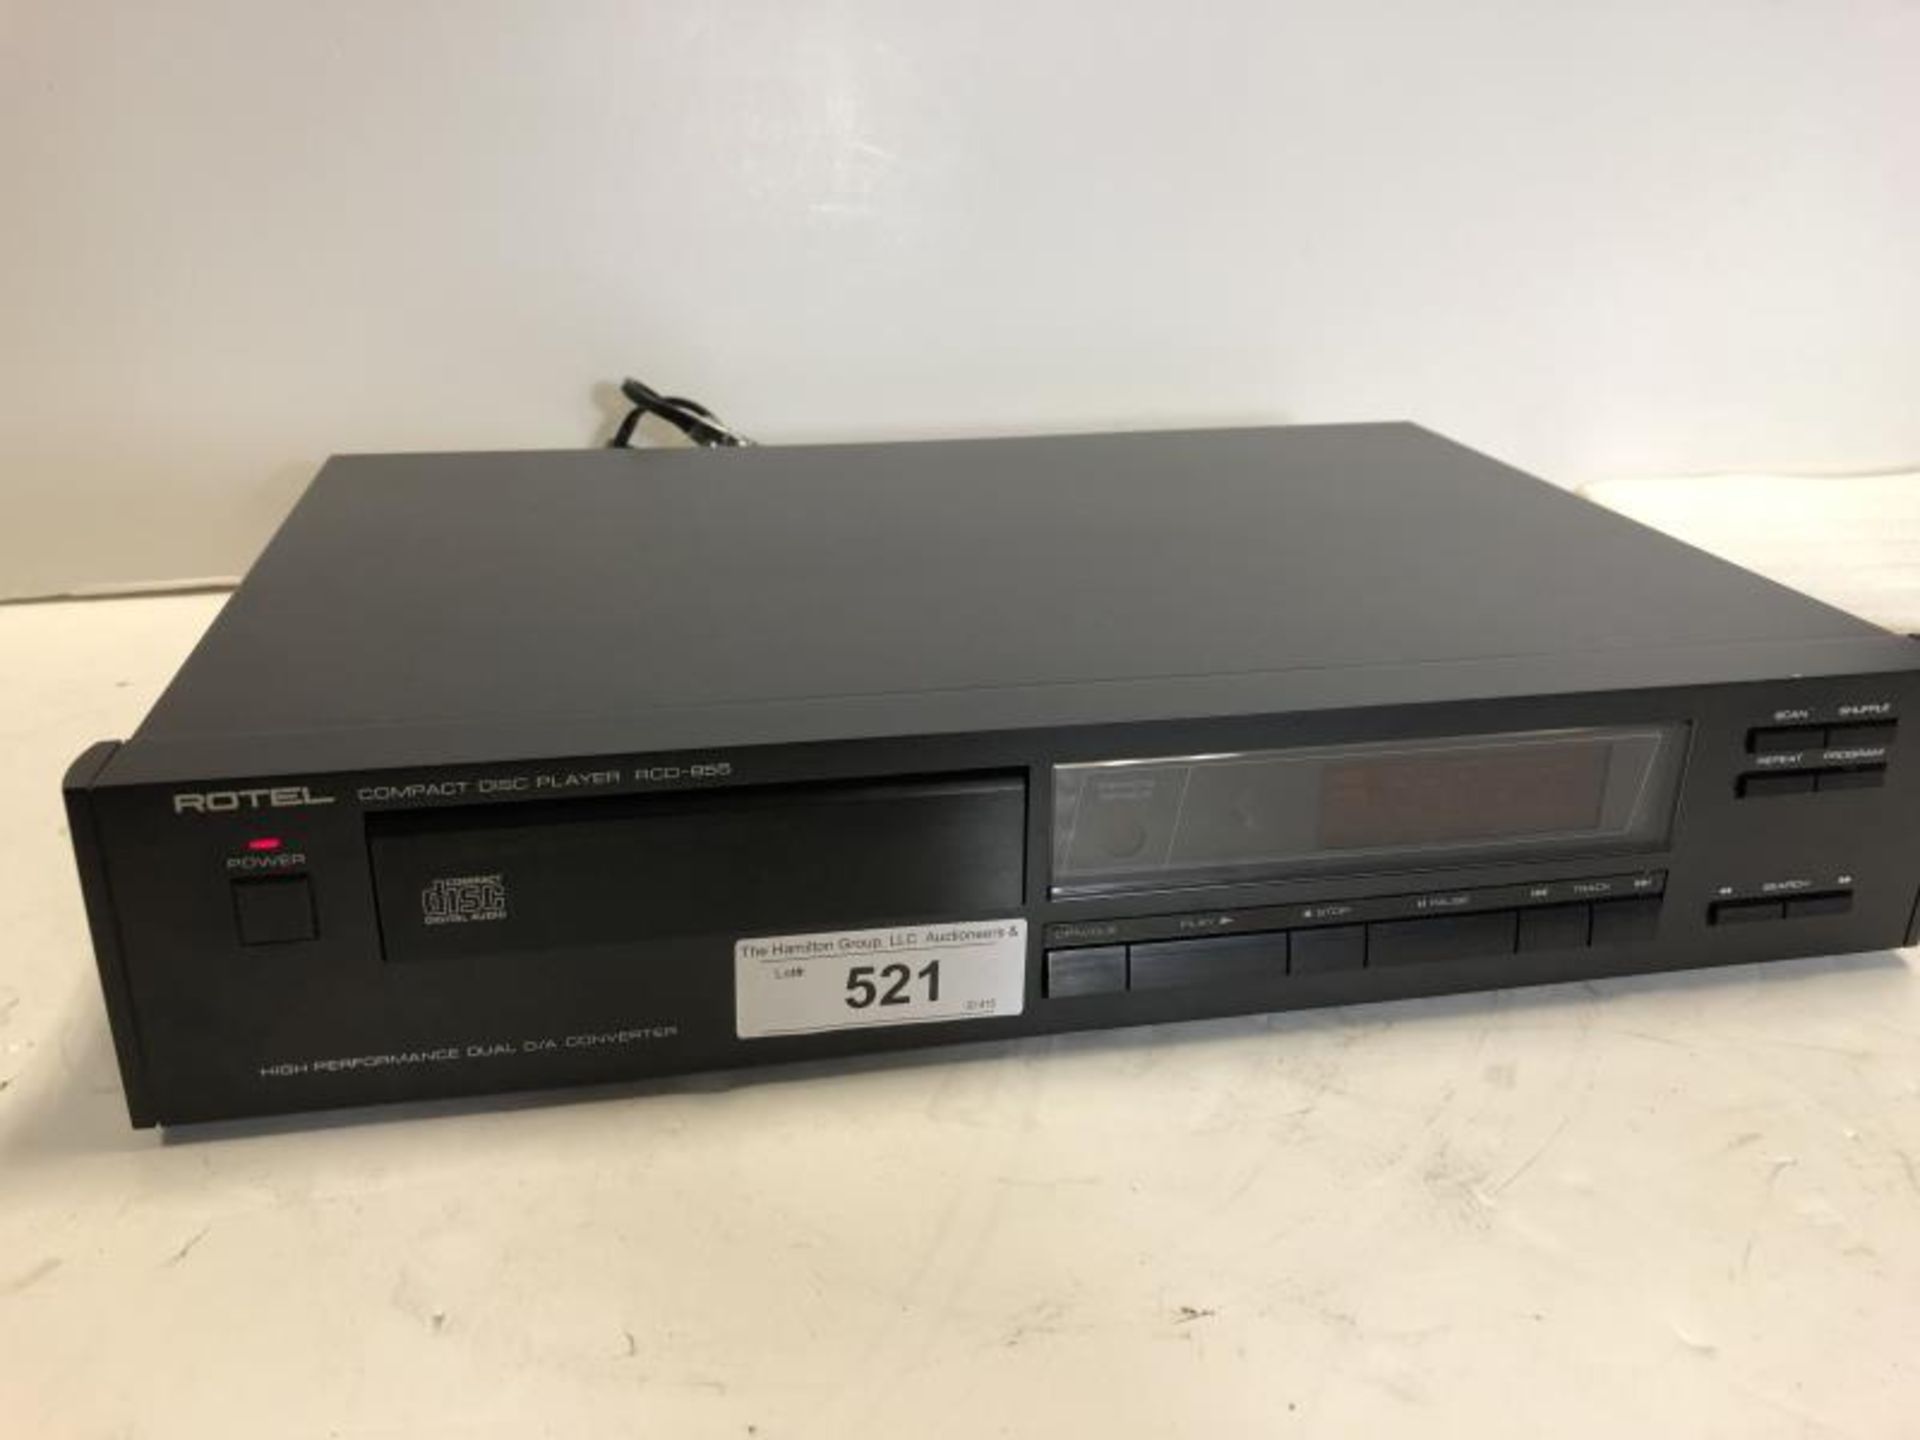 Rotel RCD 855 compact disc player dual converter, tested - powers up